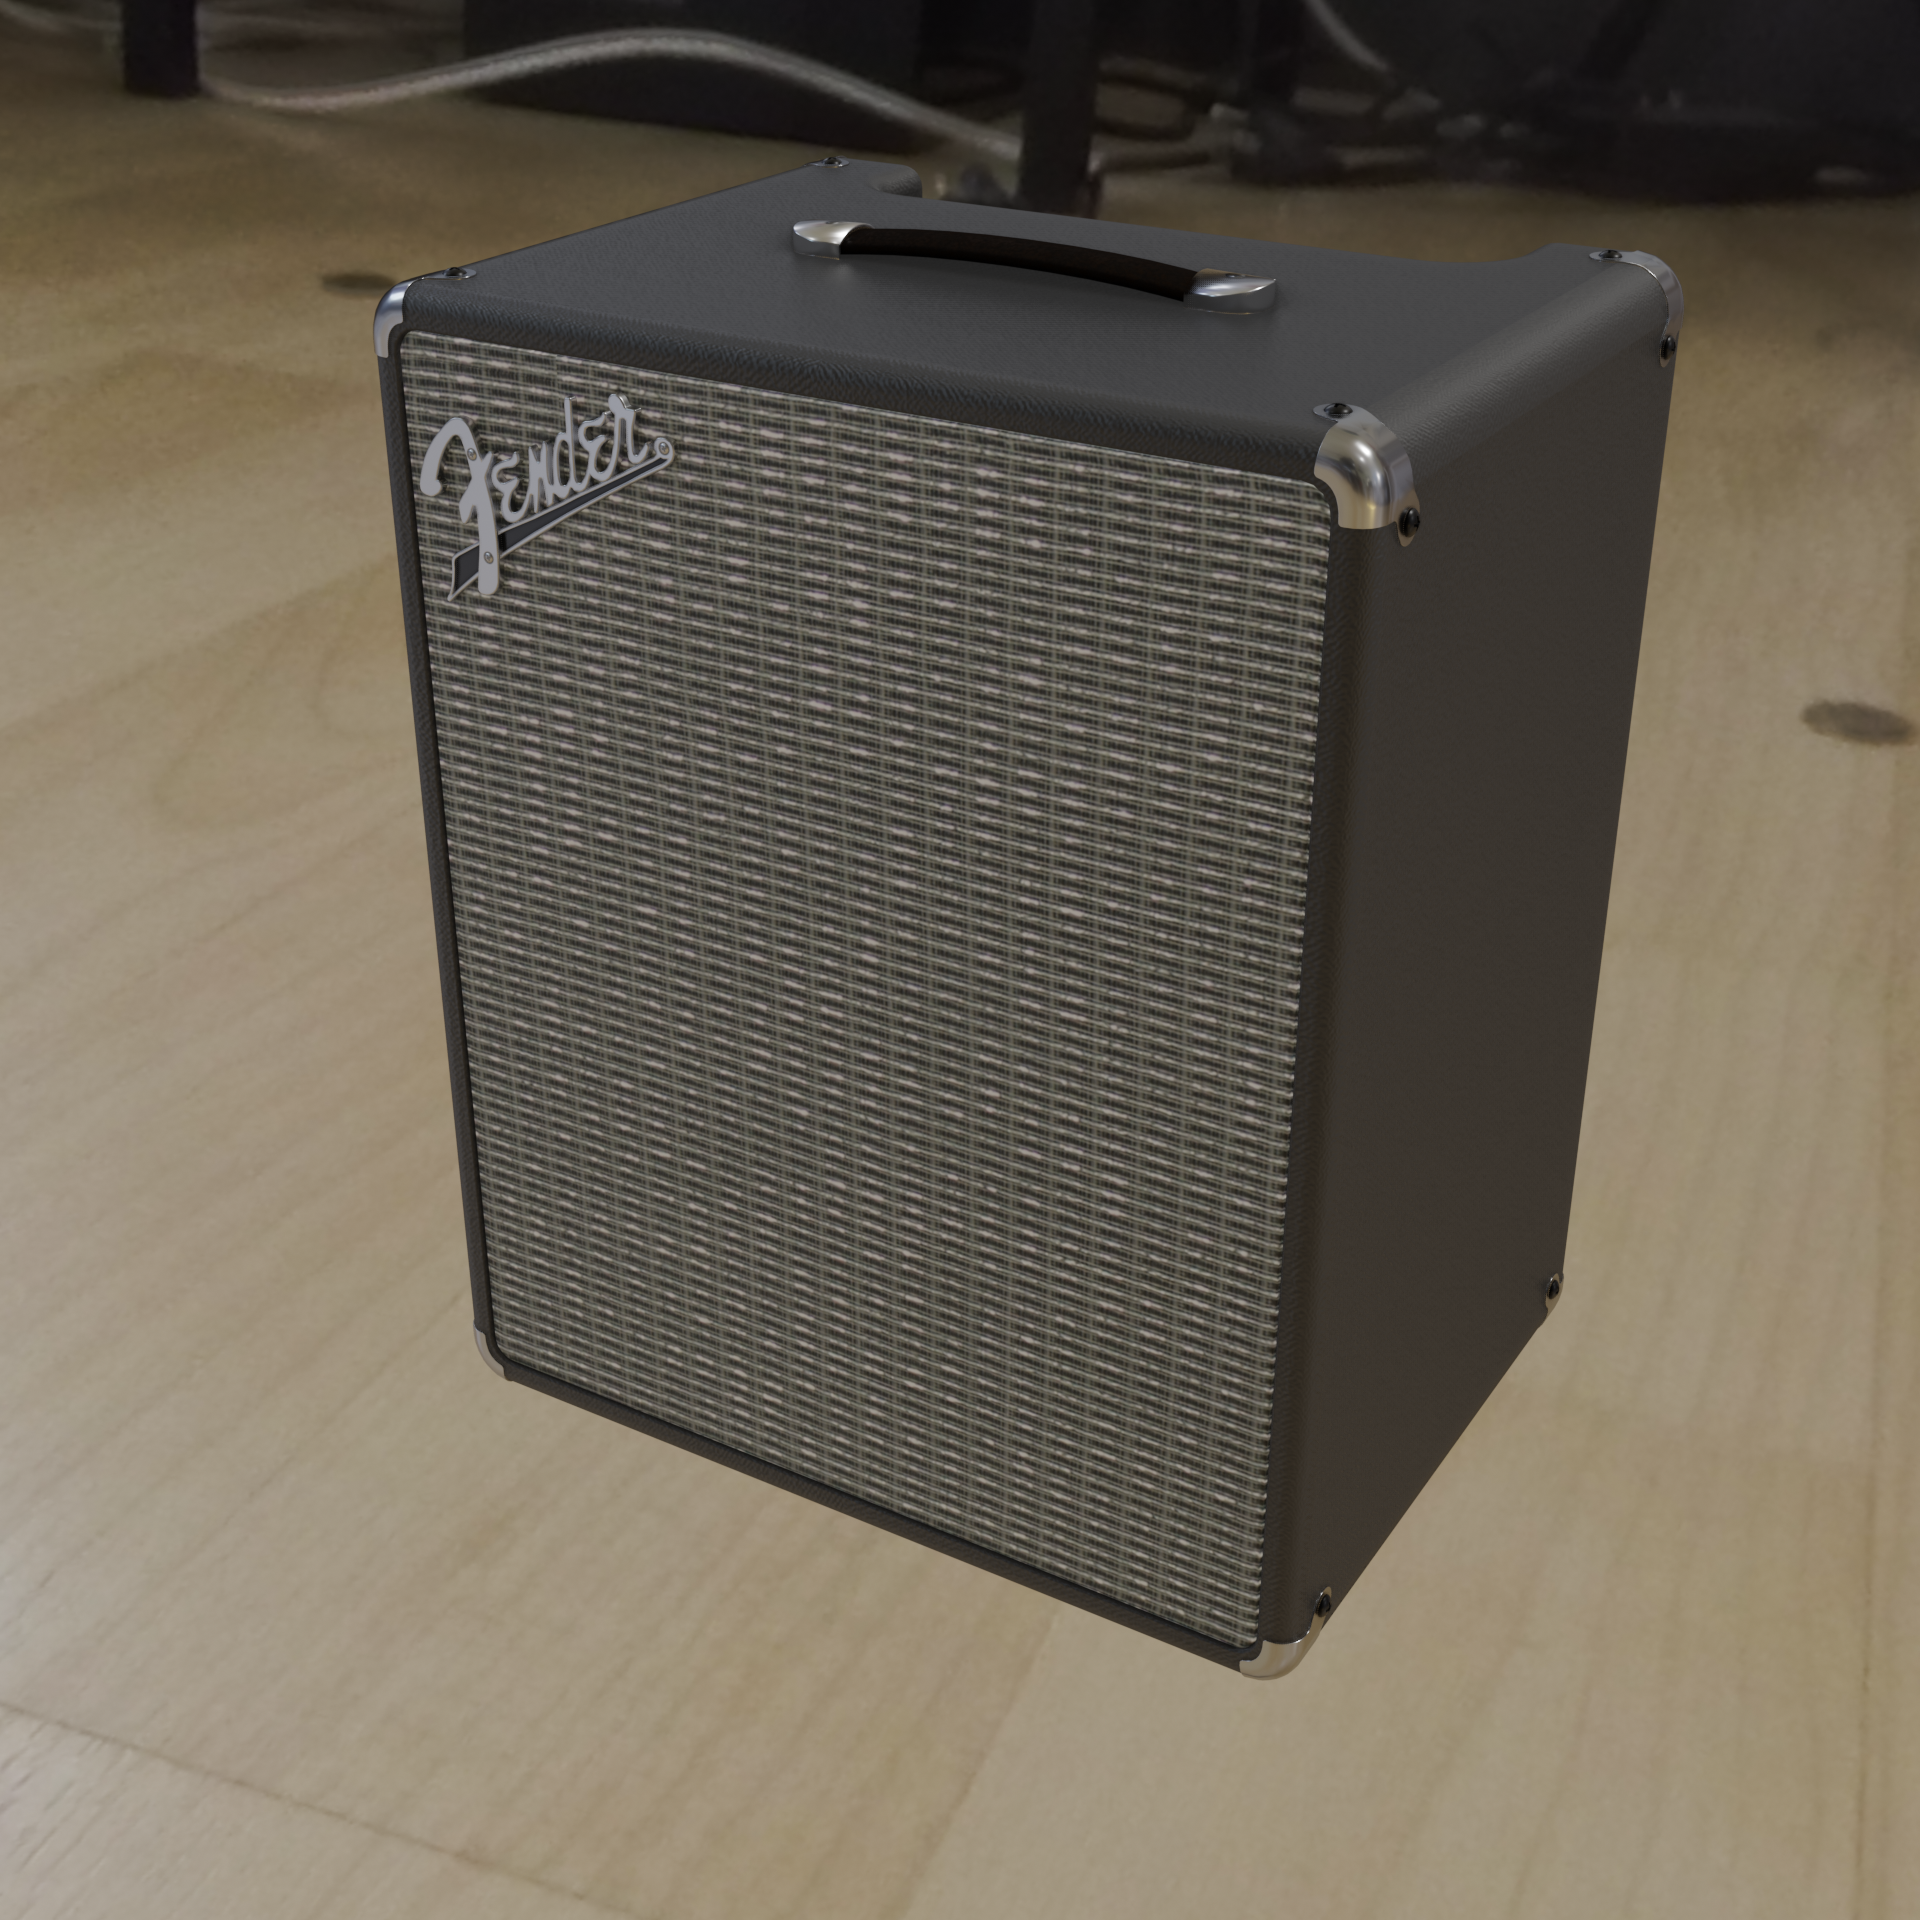 Bass Amp preview image 1